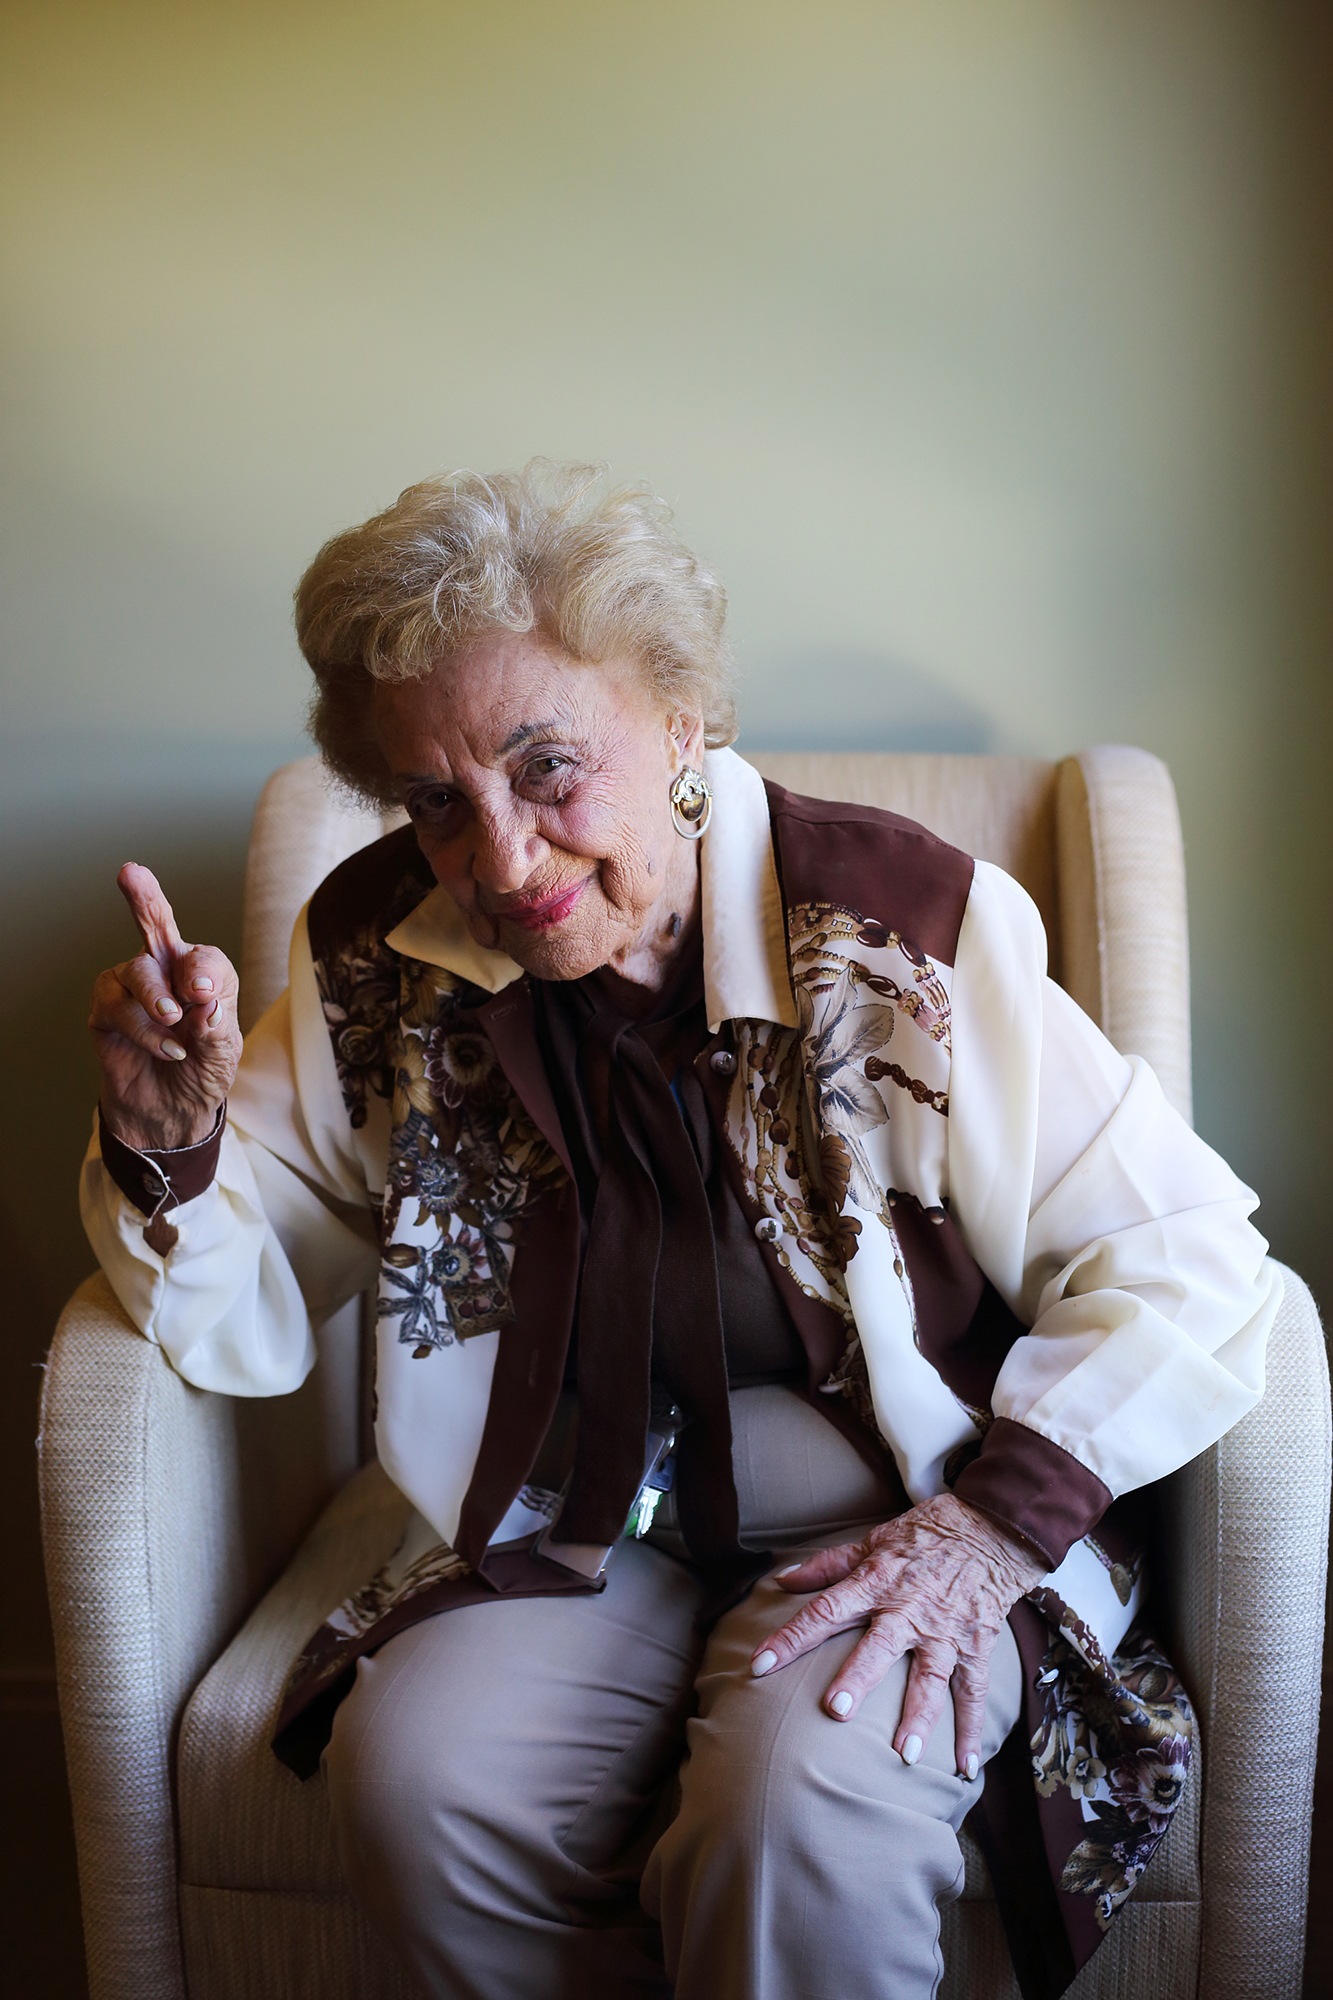  If 99-year-old Lena Goldstein could express one thing to Hitler, it would be to flip the bird. Growing up Jewish in Poland, her sense of humour helped her survive the Holocaust. On the night before she was certain she would die, she stayed up all ni